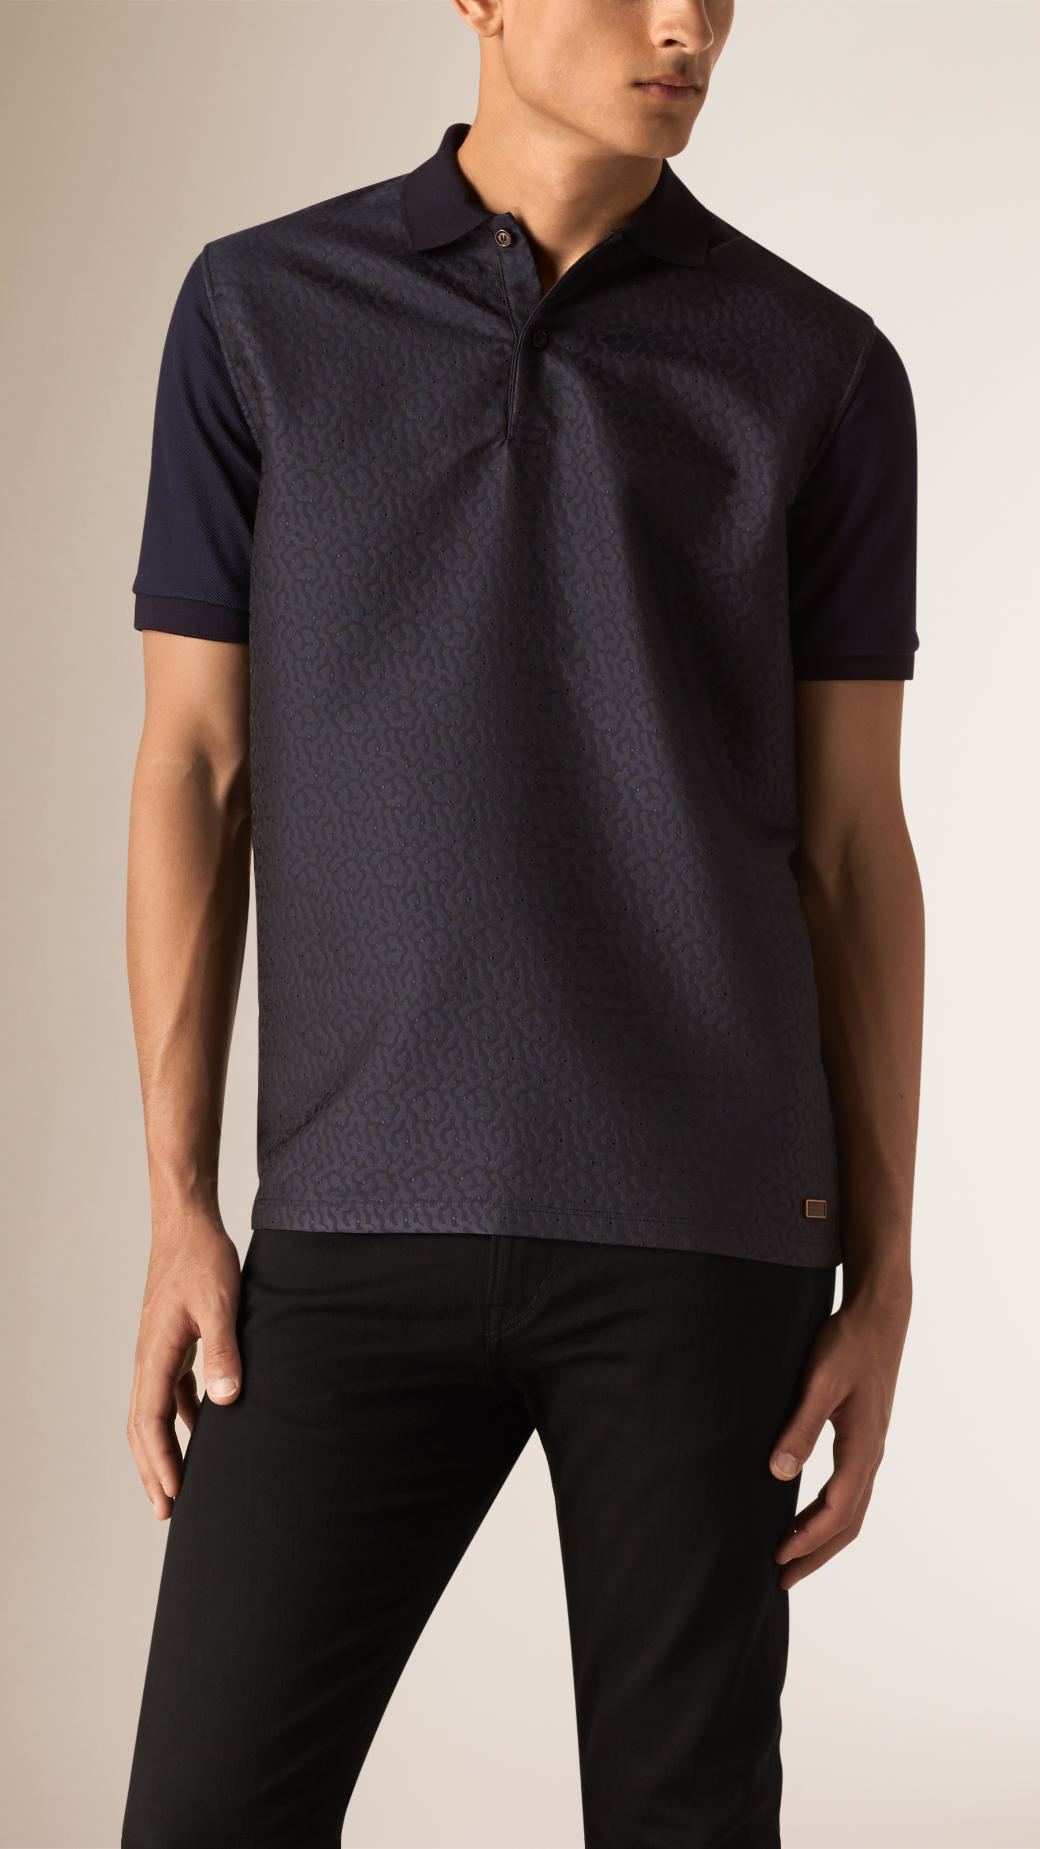 Lyst - Burberry Silk Wool Jacquard Cotton Polo Shirt in Blue for Men